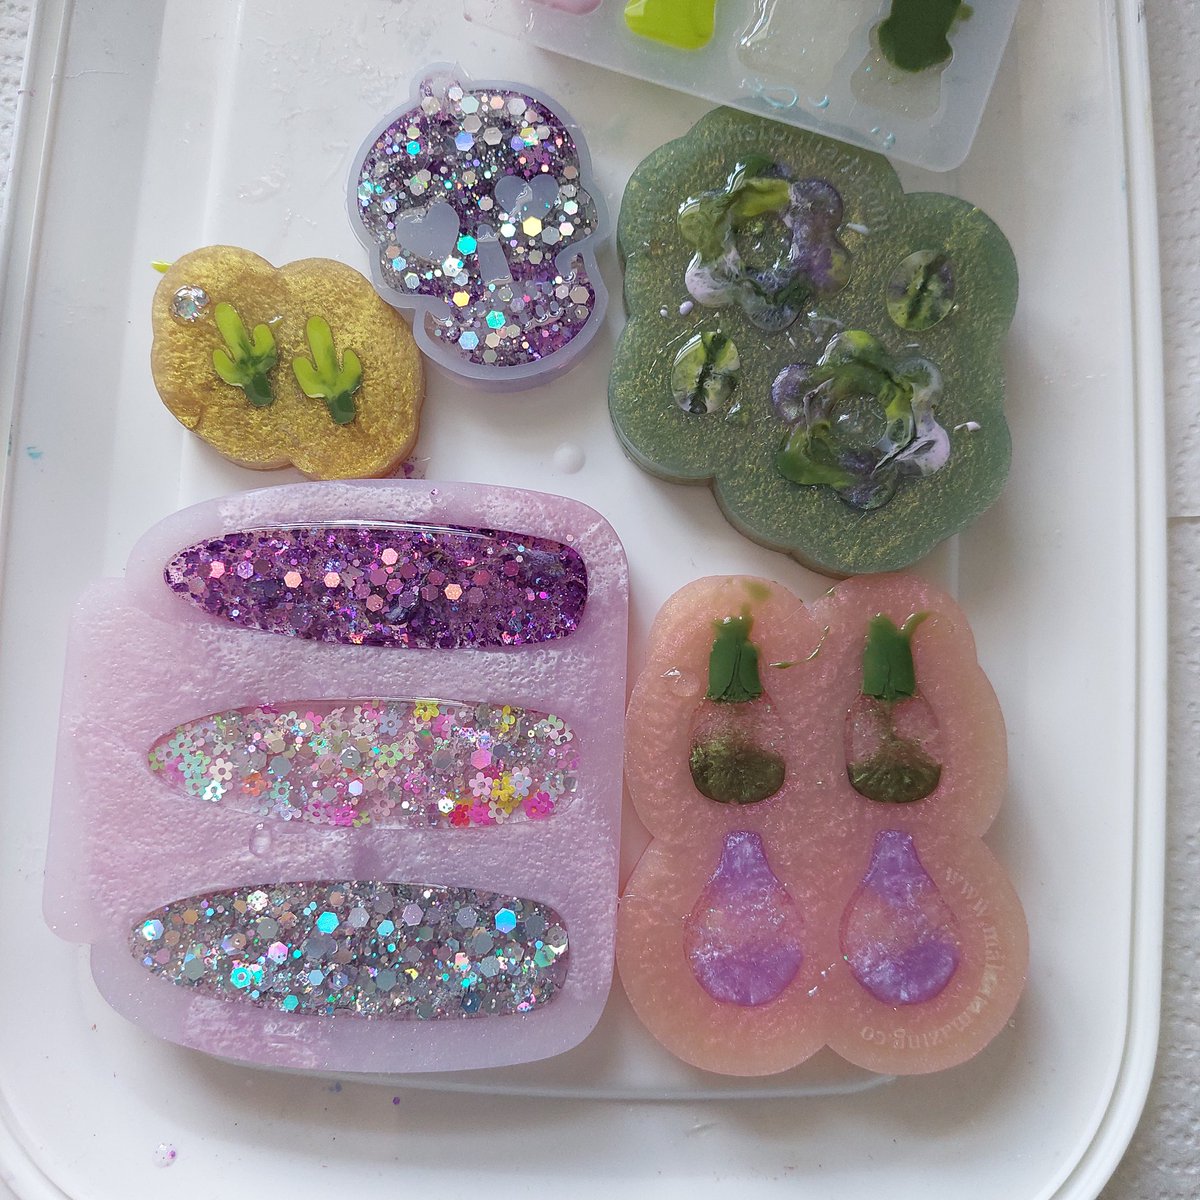 The sun has inspired me to make some super glittery pieces! And some cute little cacti earrings 😍 #MHHSBD #resin #ResinCreations